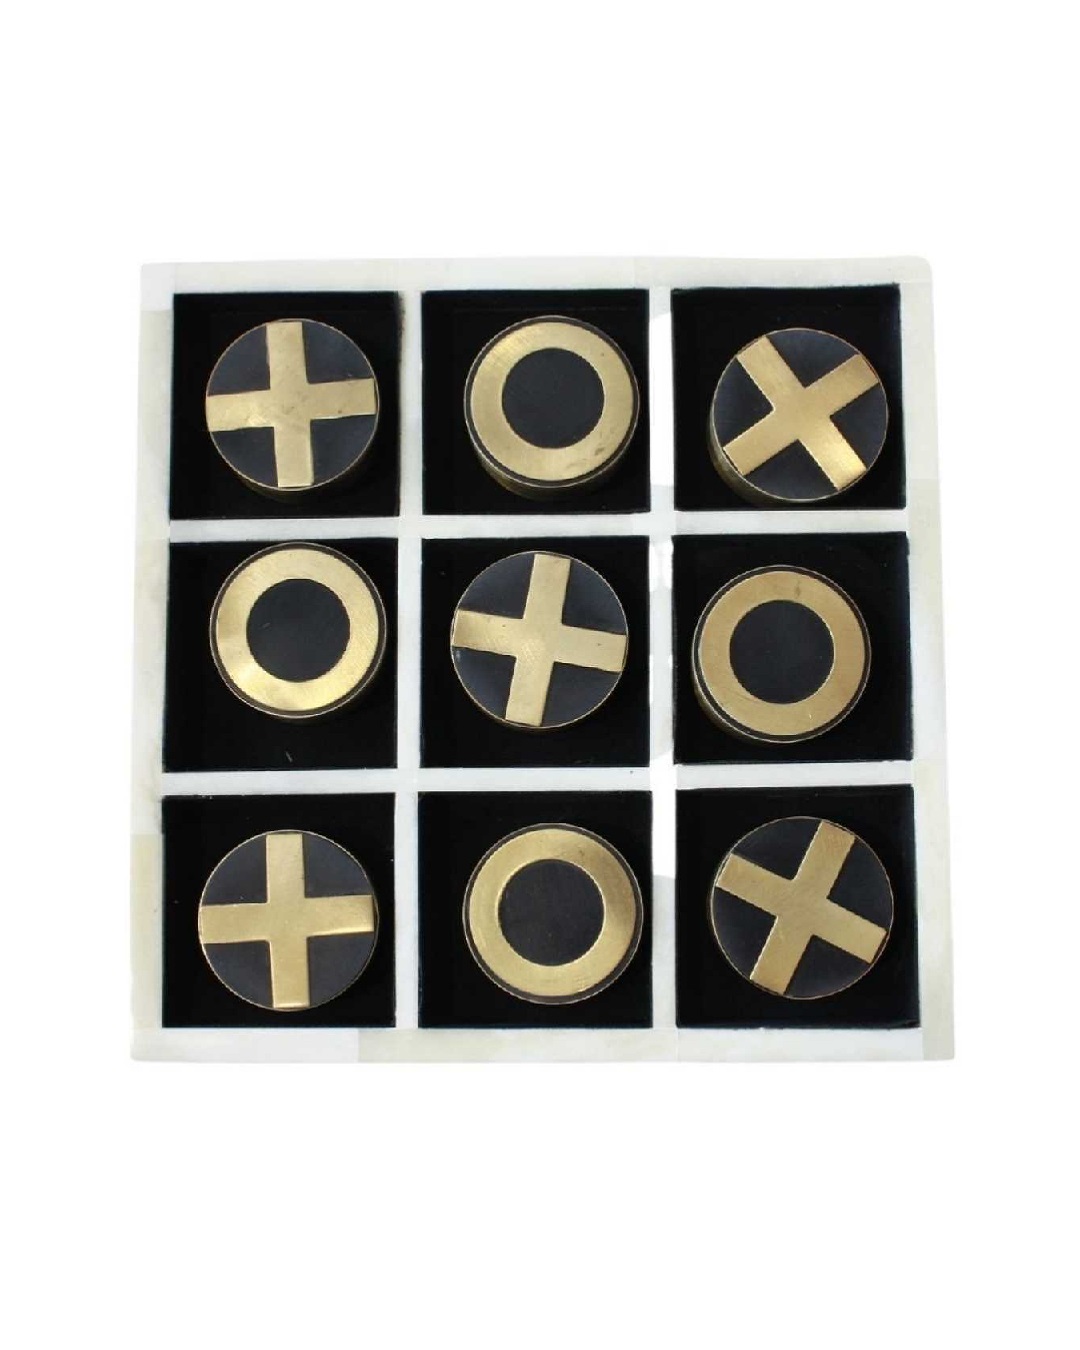 Bone noughts and crosses game